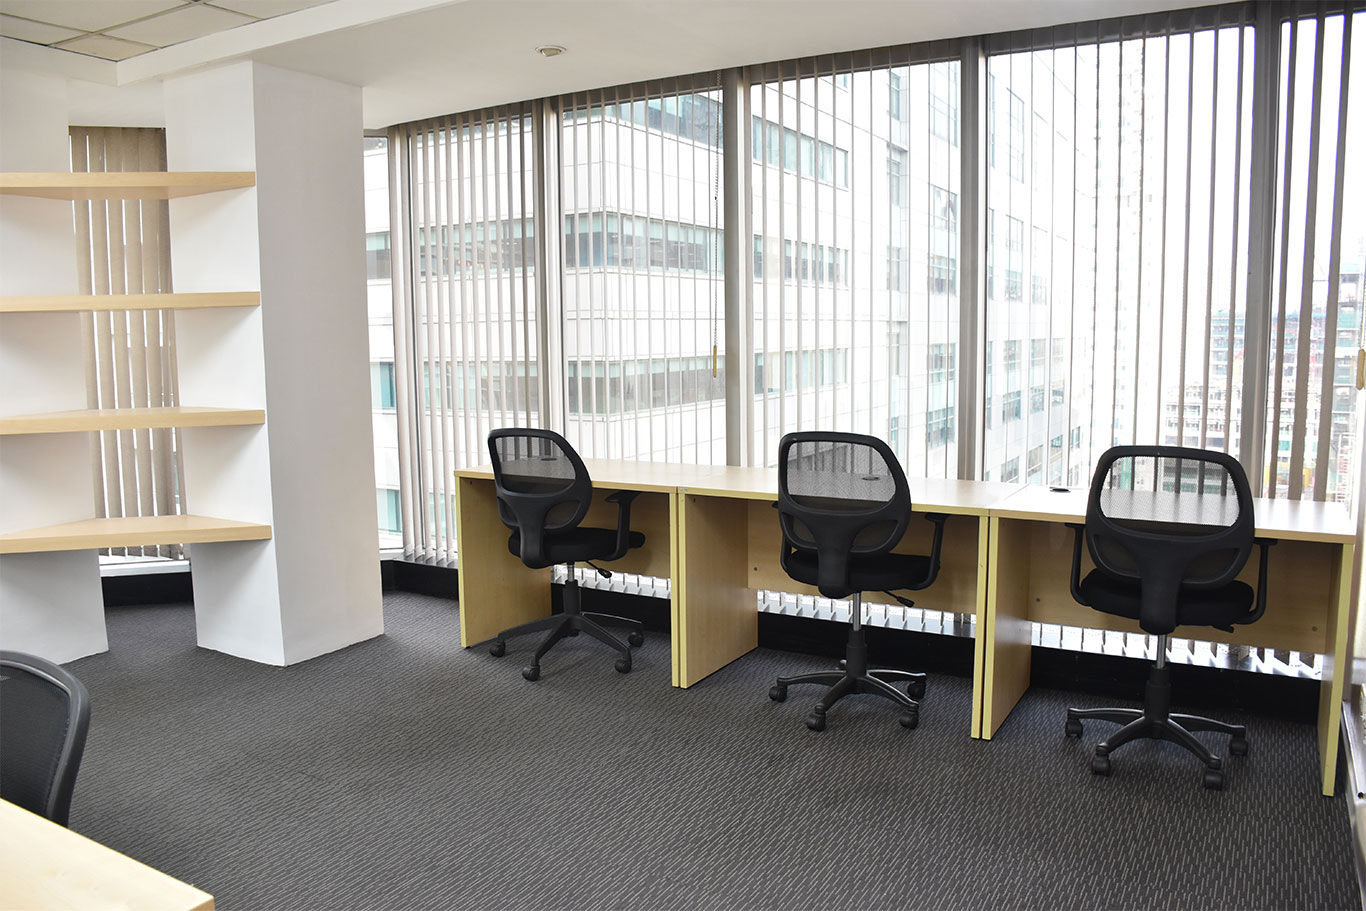 KMC Private Office Space for rent in Rufino Pacific Tower, Makati City, Manila, Philippines - EpicSpace